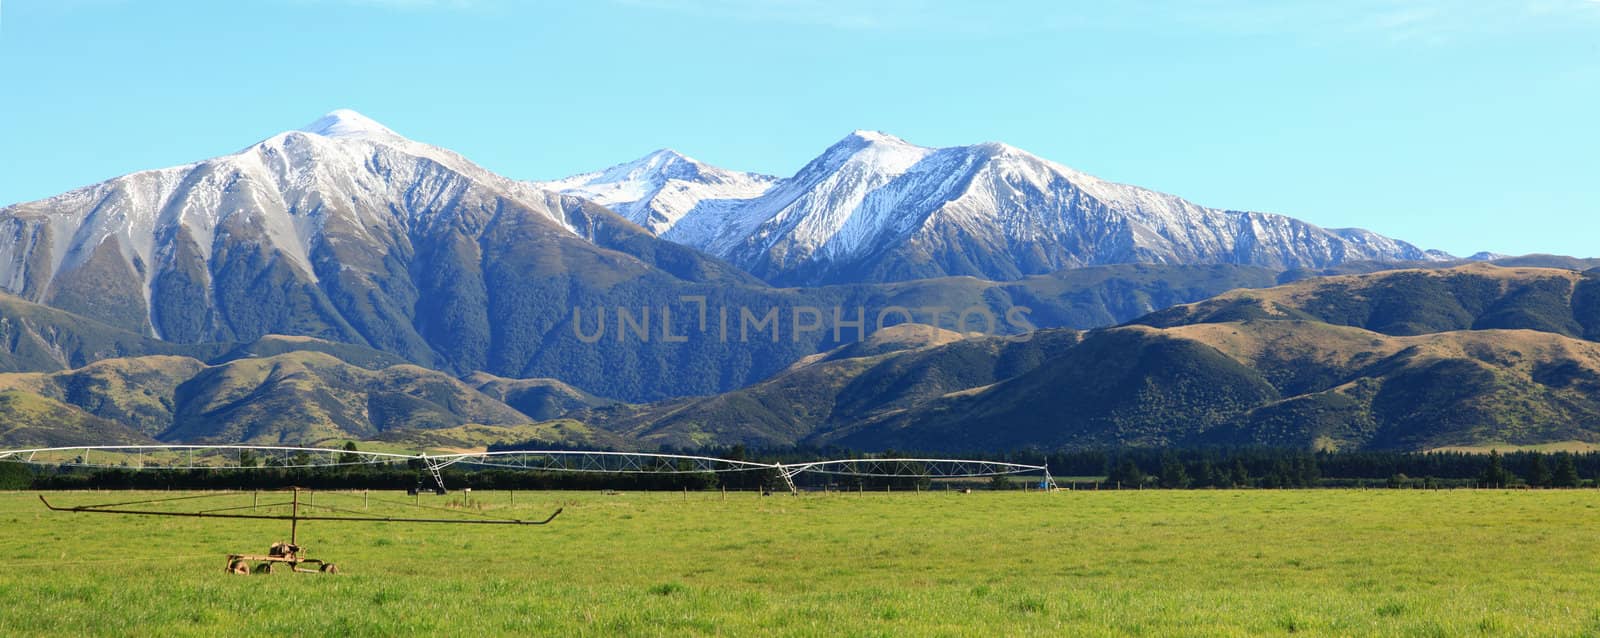 southern alpine alps in New Zealand by vichie81